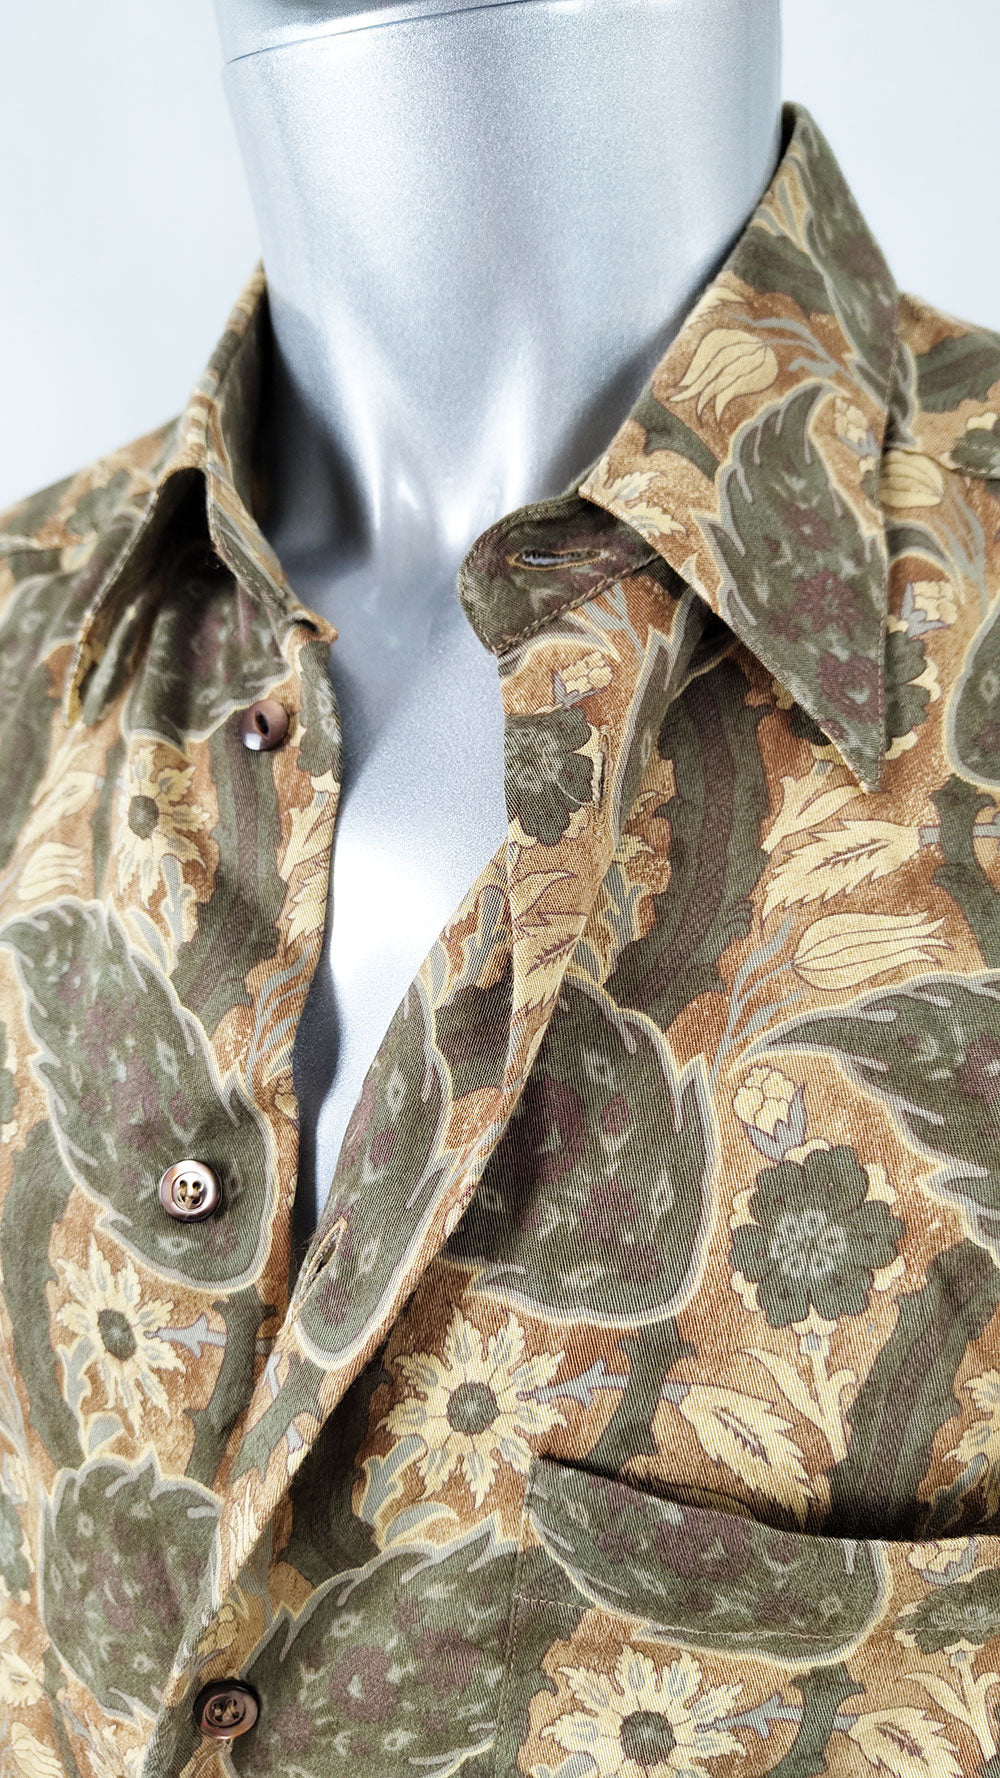 Byblos Vintage Mens Brown & Green Flowy Paisley Shirt, 1980s